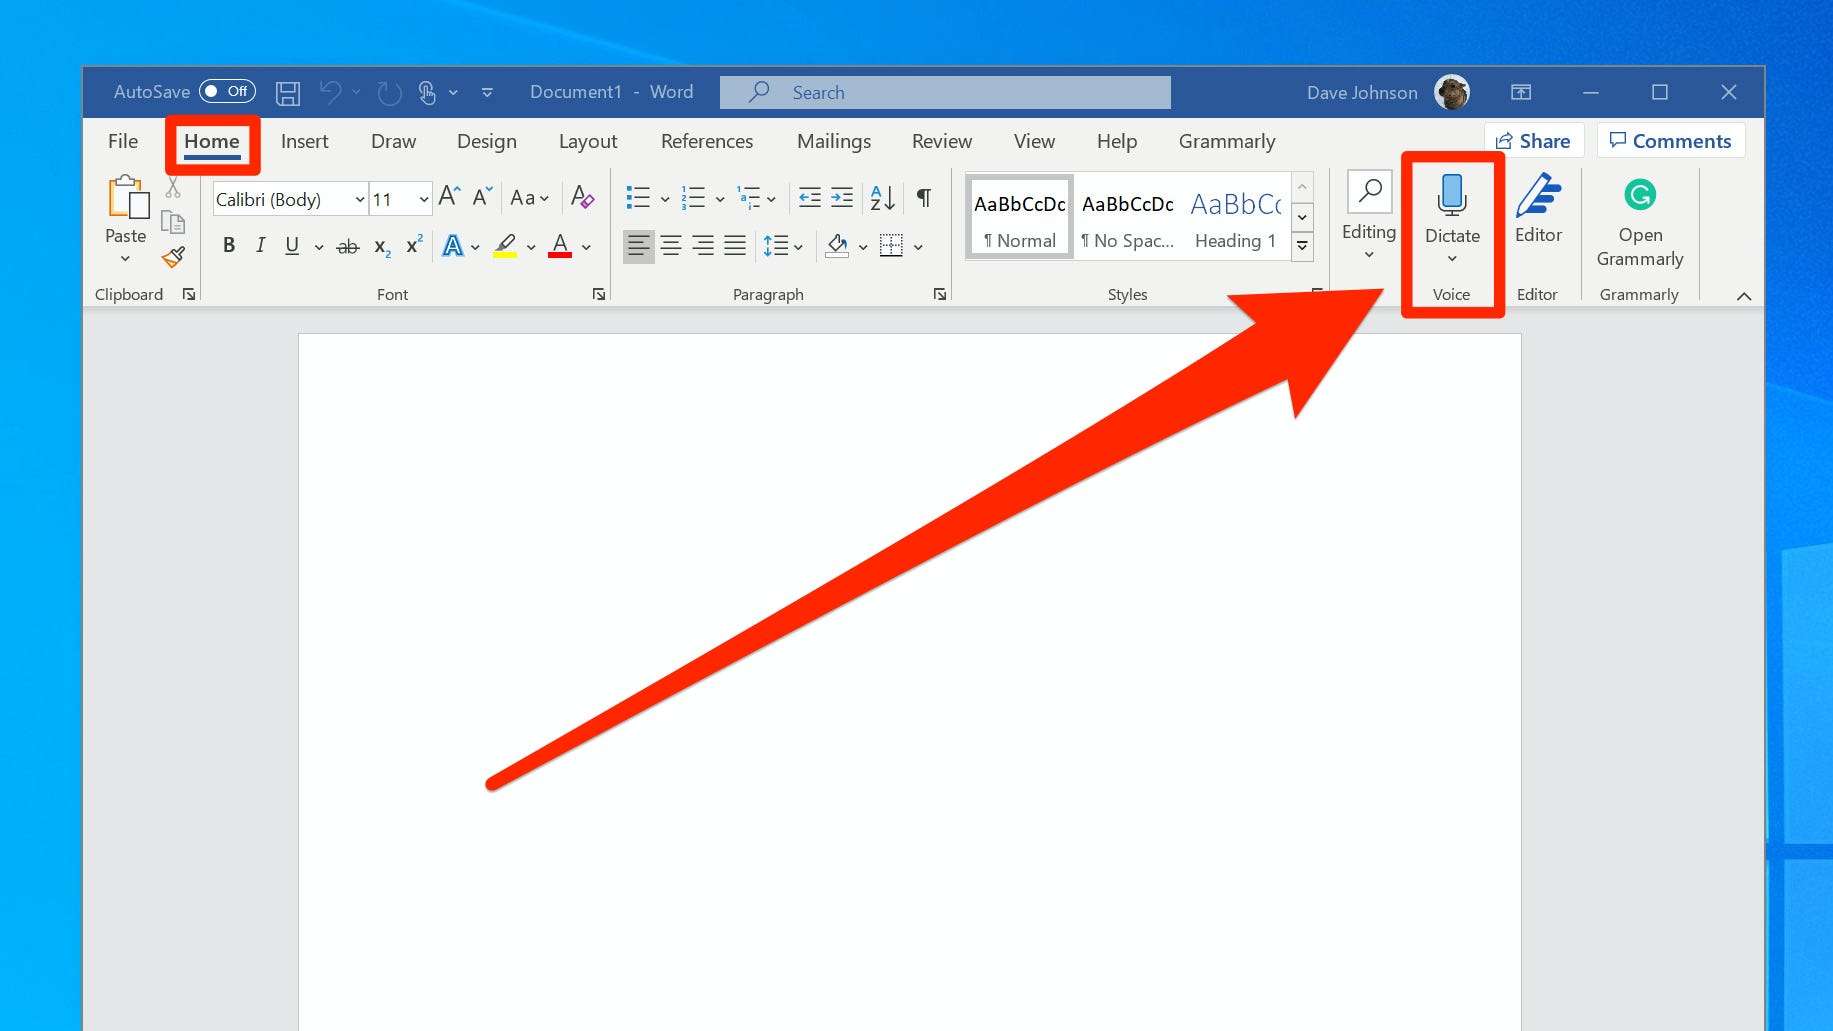 how to do speech text in word